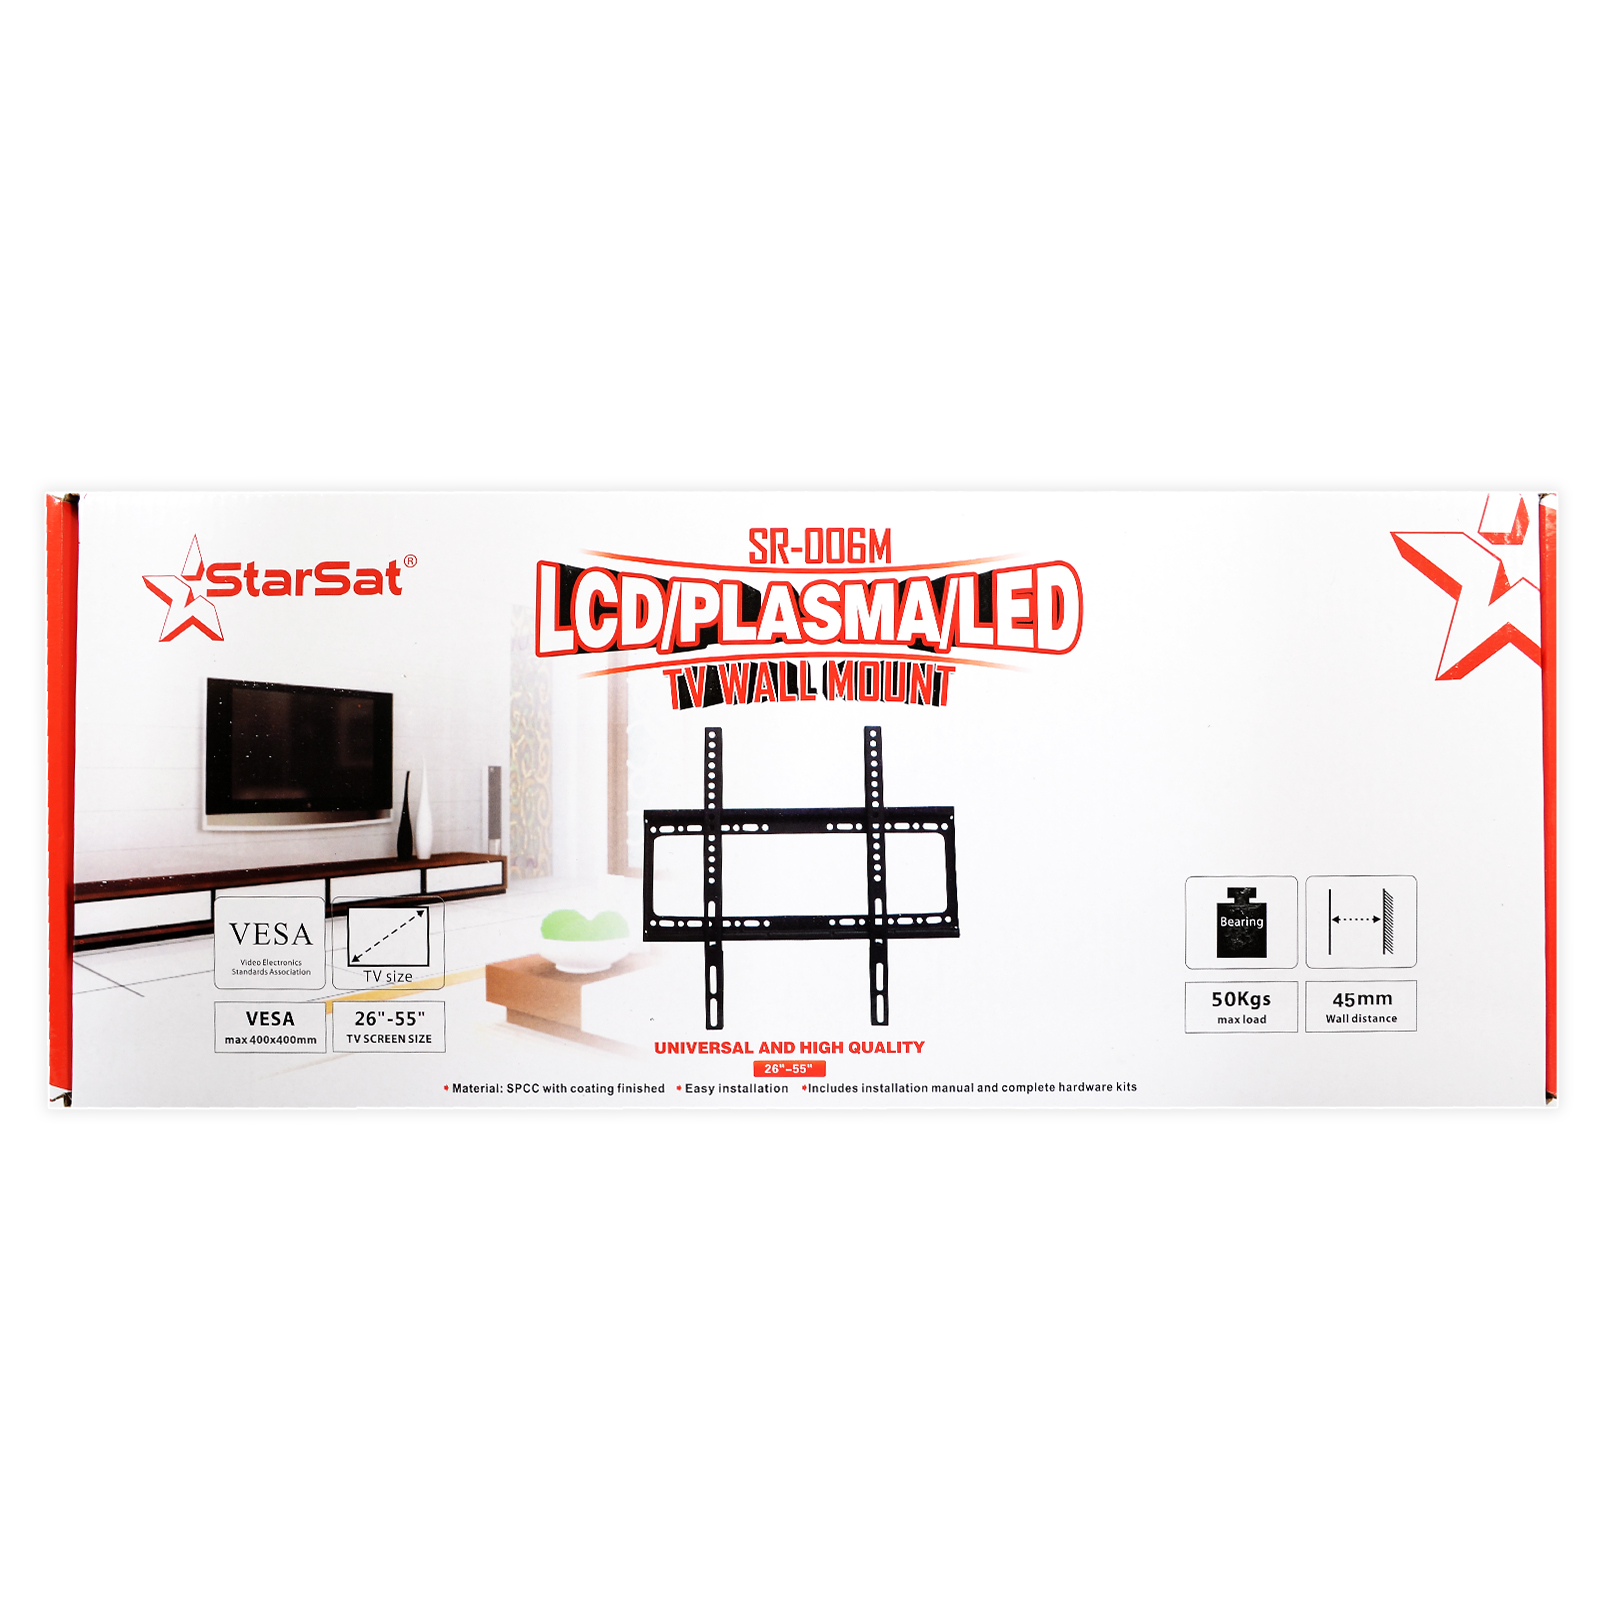 StarSat-006M LCD, Plasma, LED TV Wall mount Up to 50KGgs